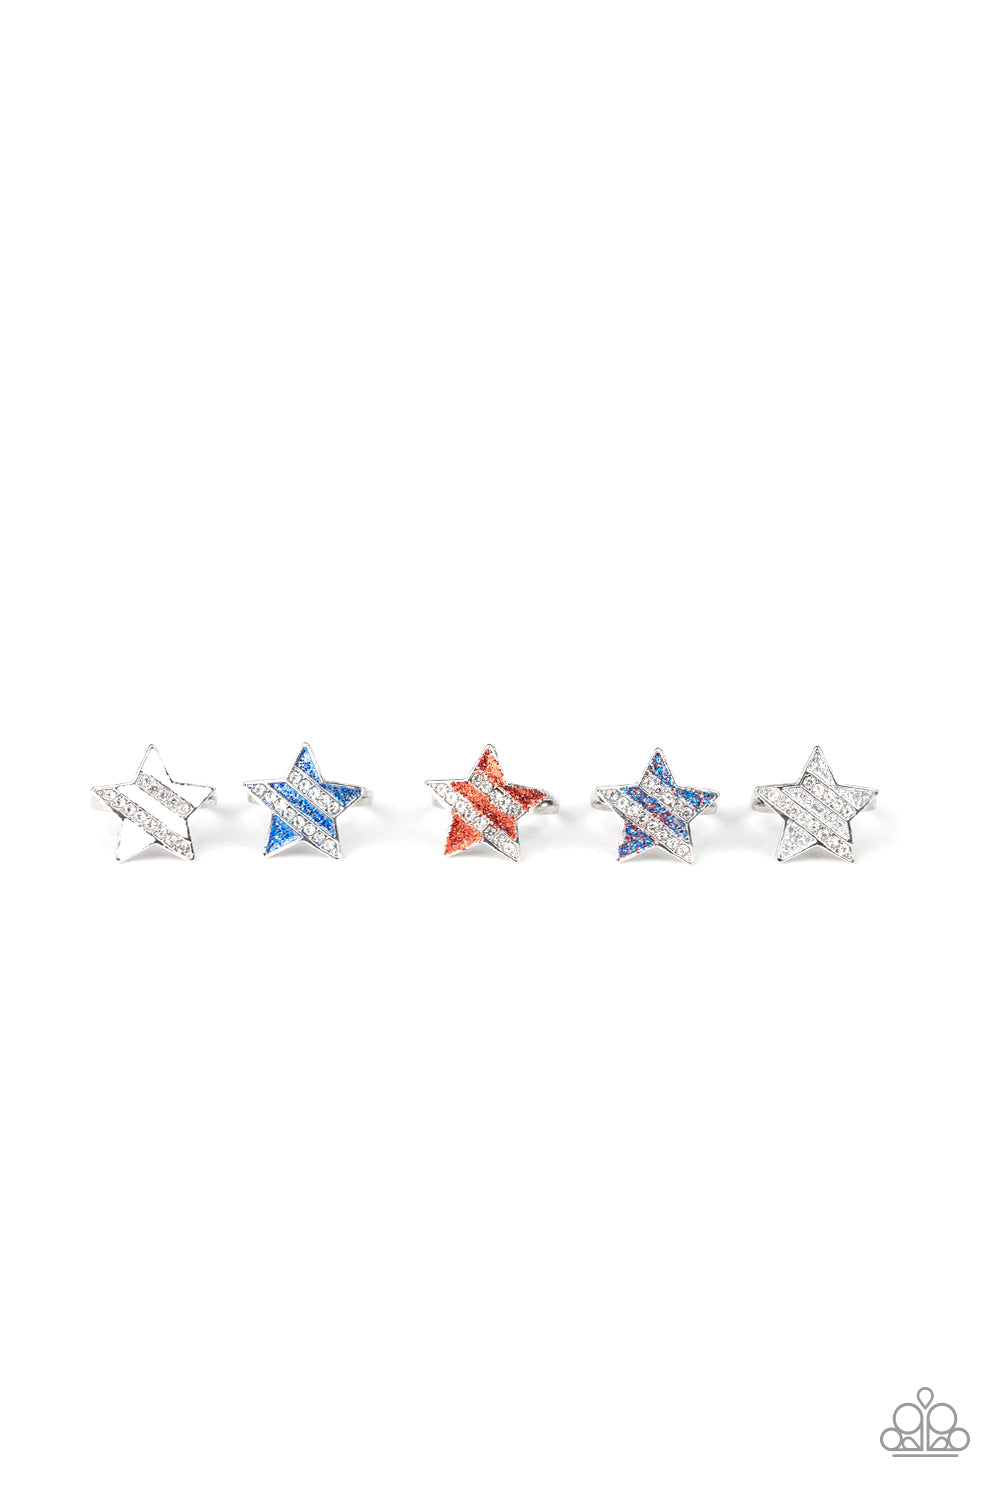 1 pack of 5 Lil Precious Star and Rhinestone Rings